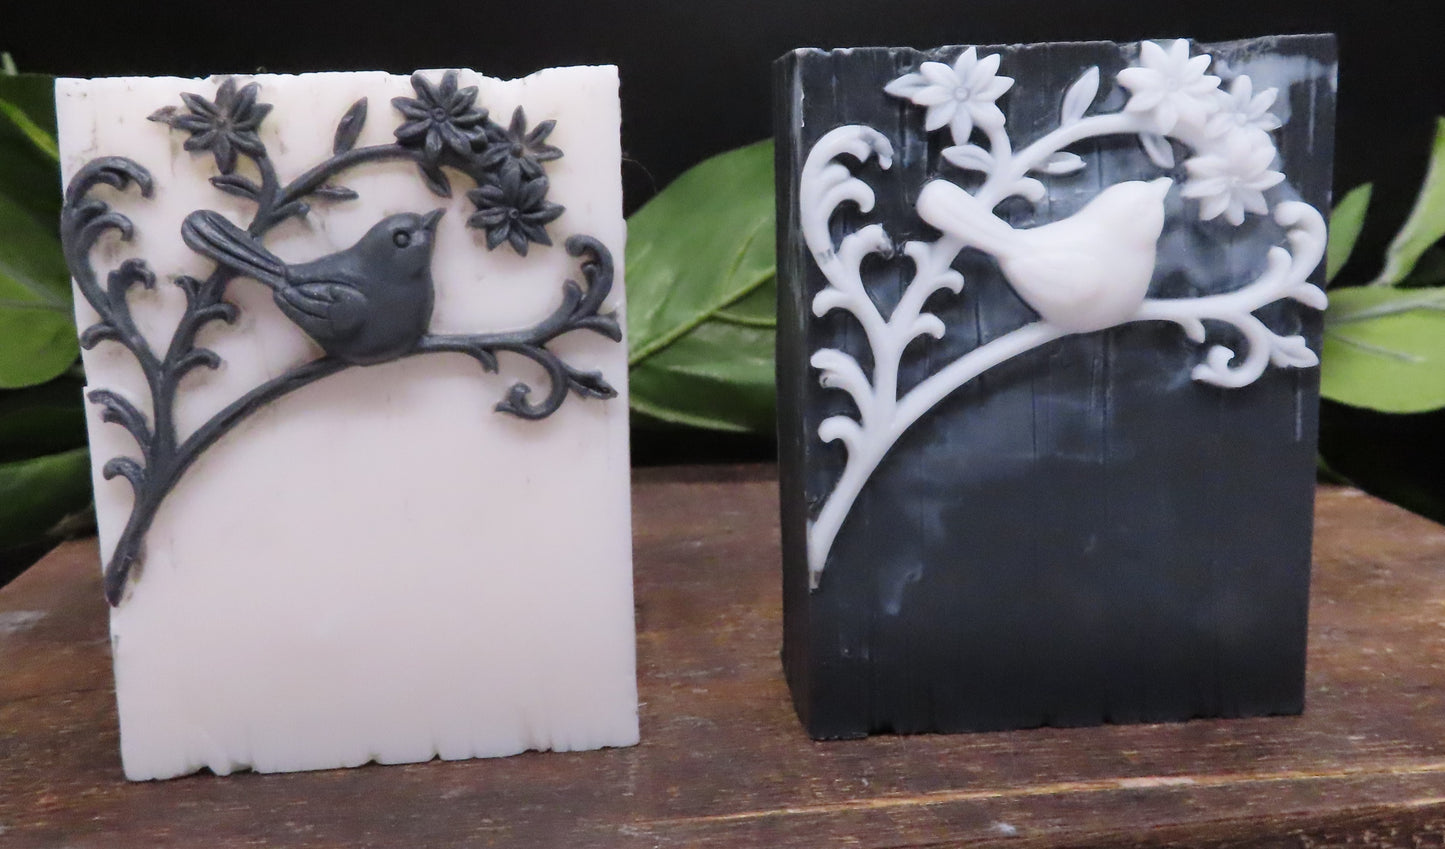 black variations of handmade bird goat milk soap.  Black details on white bar, white details on black bar.  This is simply the coolest color option.